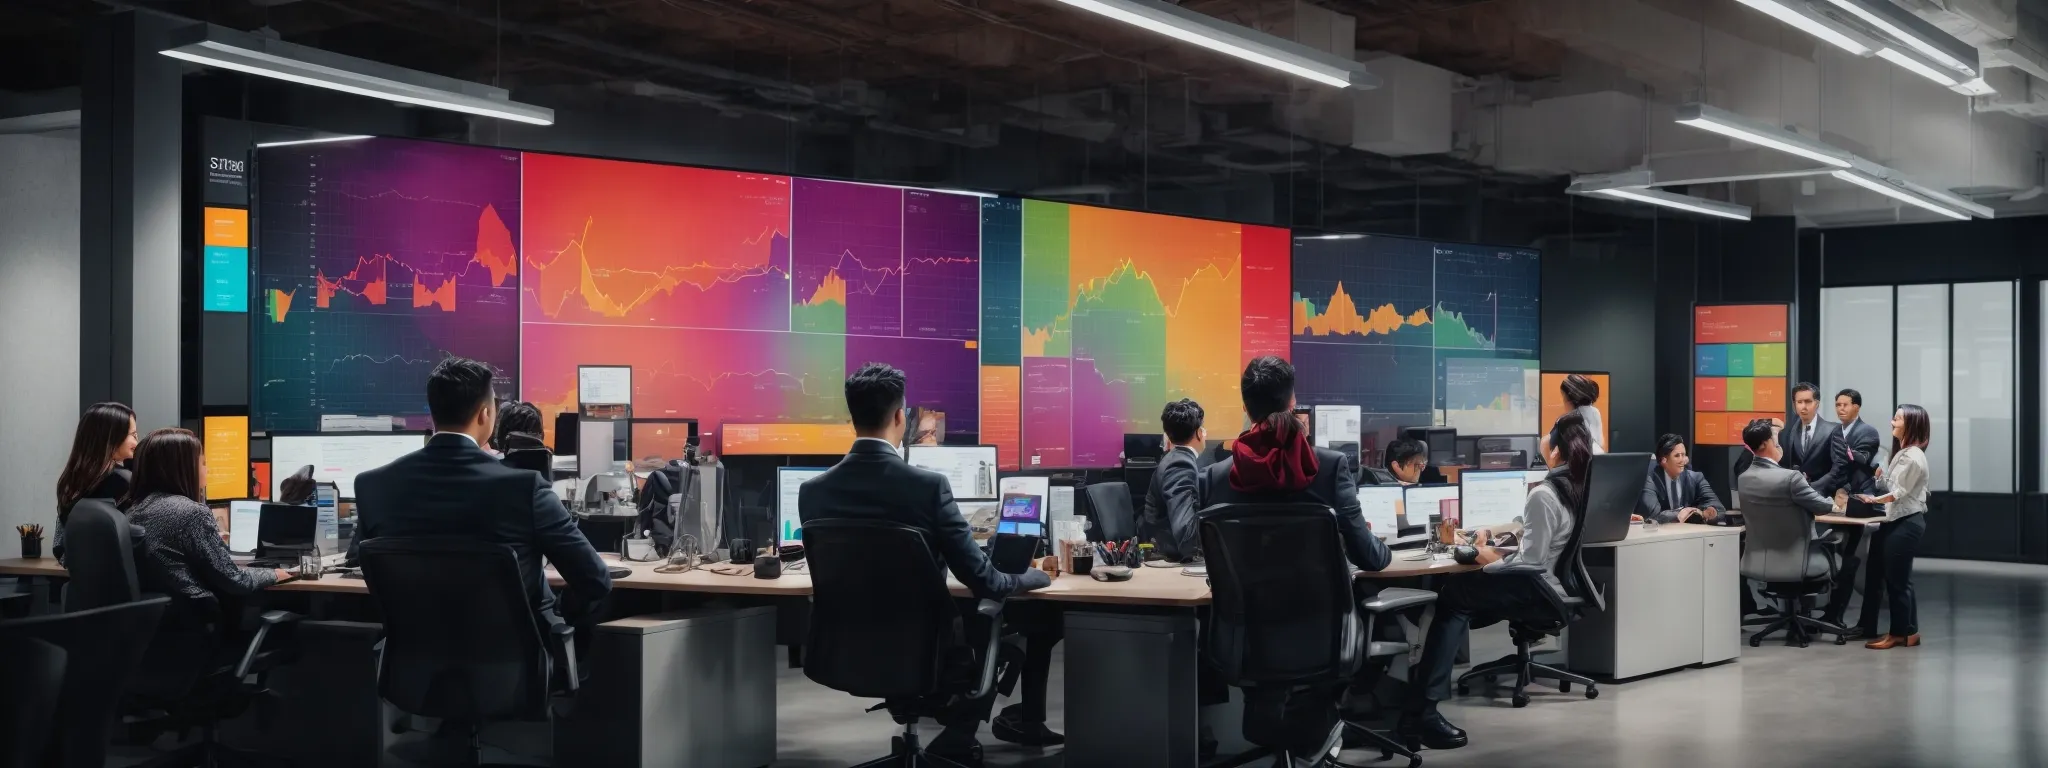 a modern office environment with a group of marketers strategizing over a large digital screen displaying colorful graphs of social media metrics.